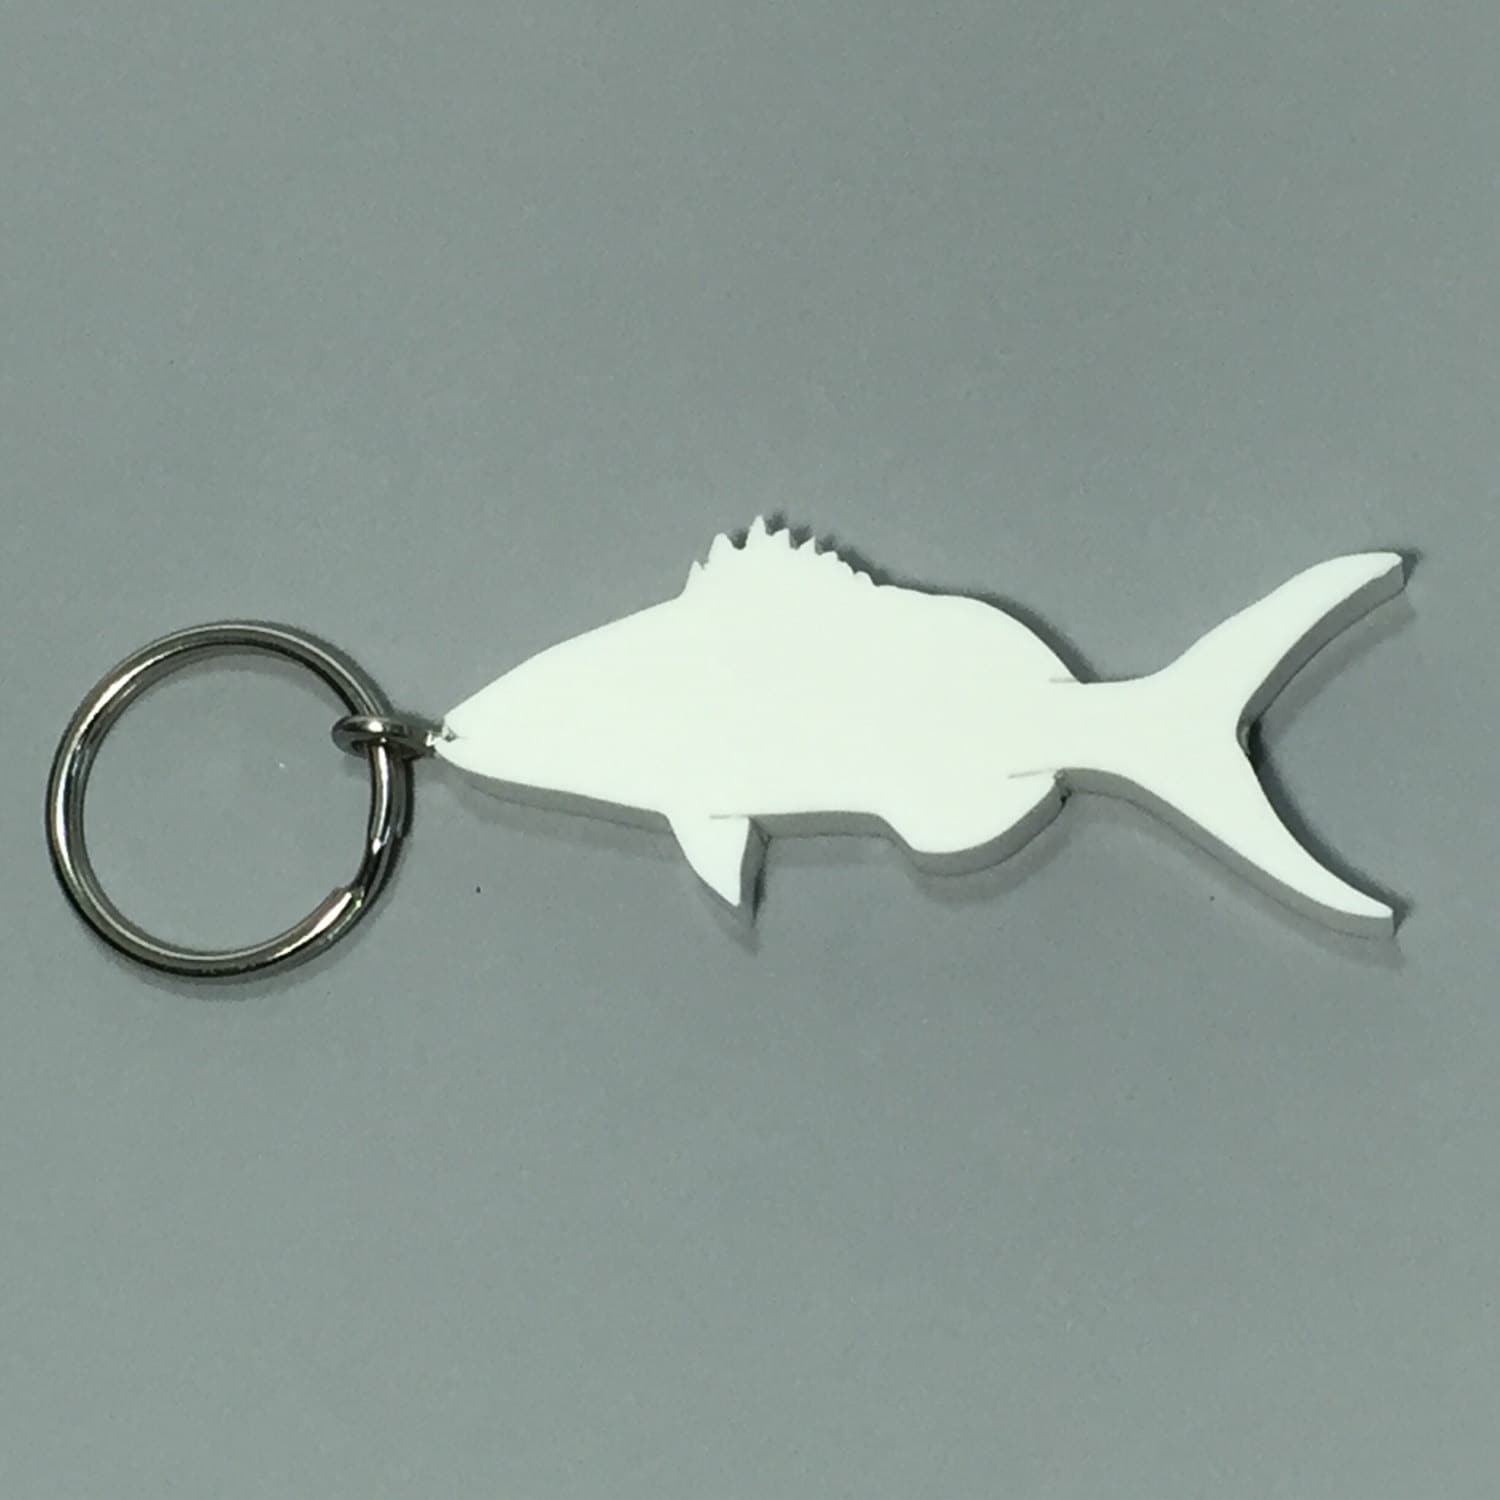 Yellowtail Snapper Fish Keychain Recycled Materials Stainless Steel  Keychain Eco Friendly Gifts for Fishermen 